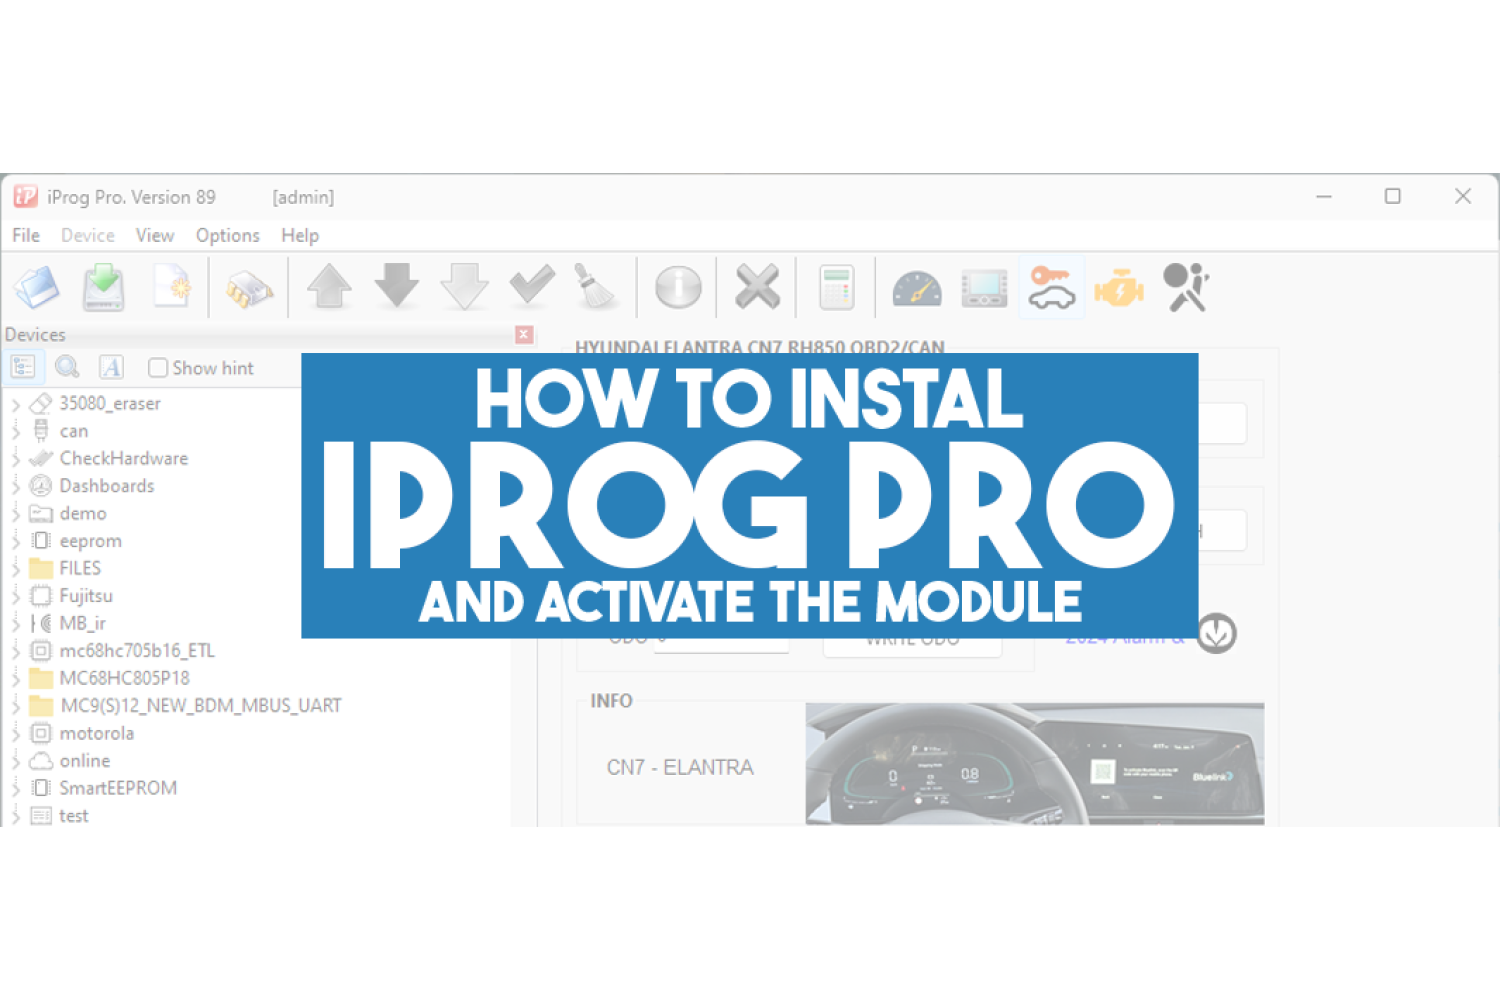 How to install iProg Pro and activate scripts